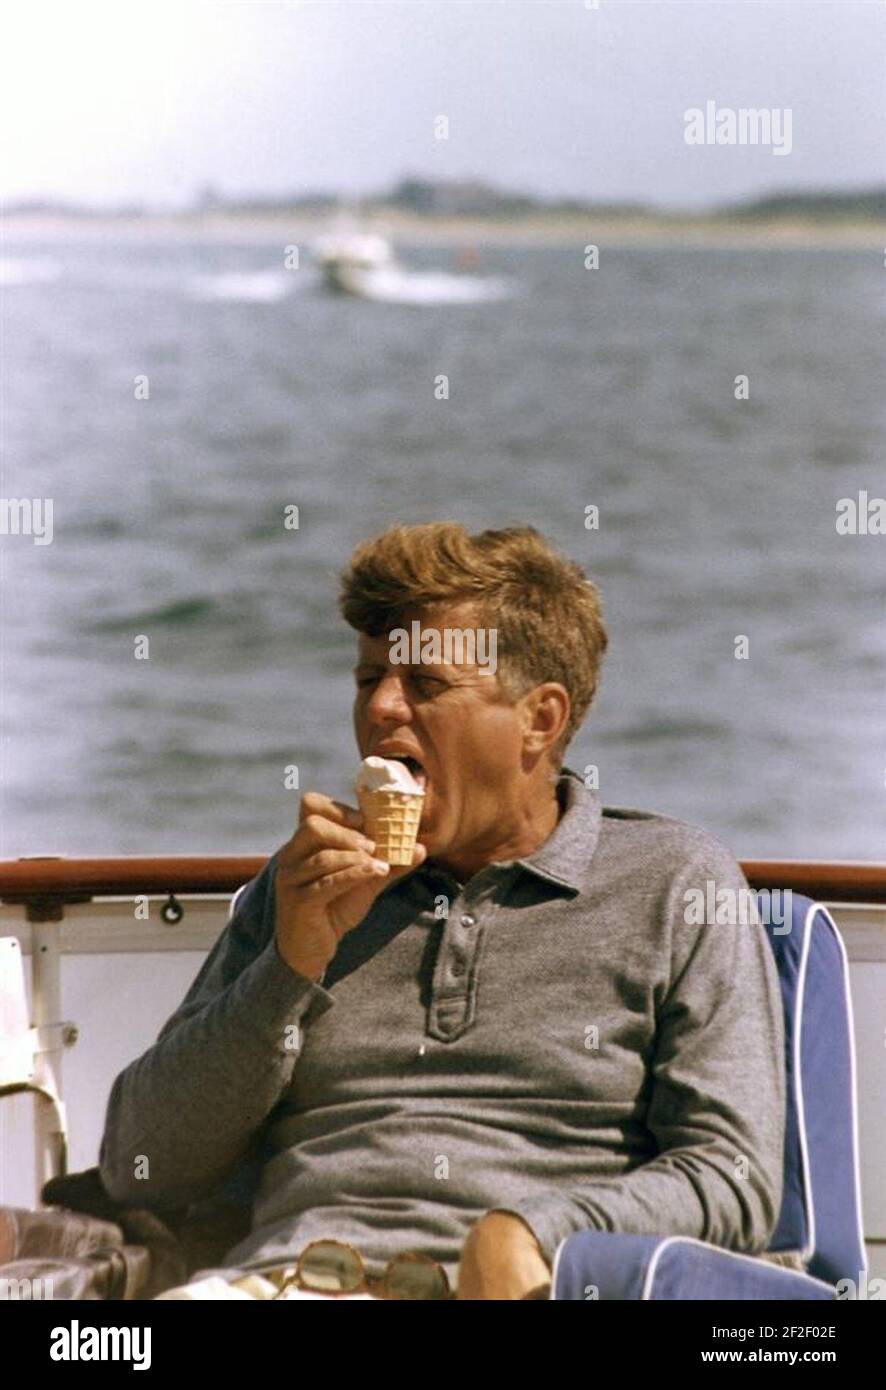 President Kennedy with ice cream cone, 31 August 1963. Stock Photo